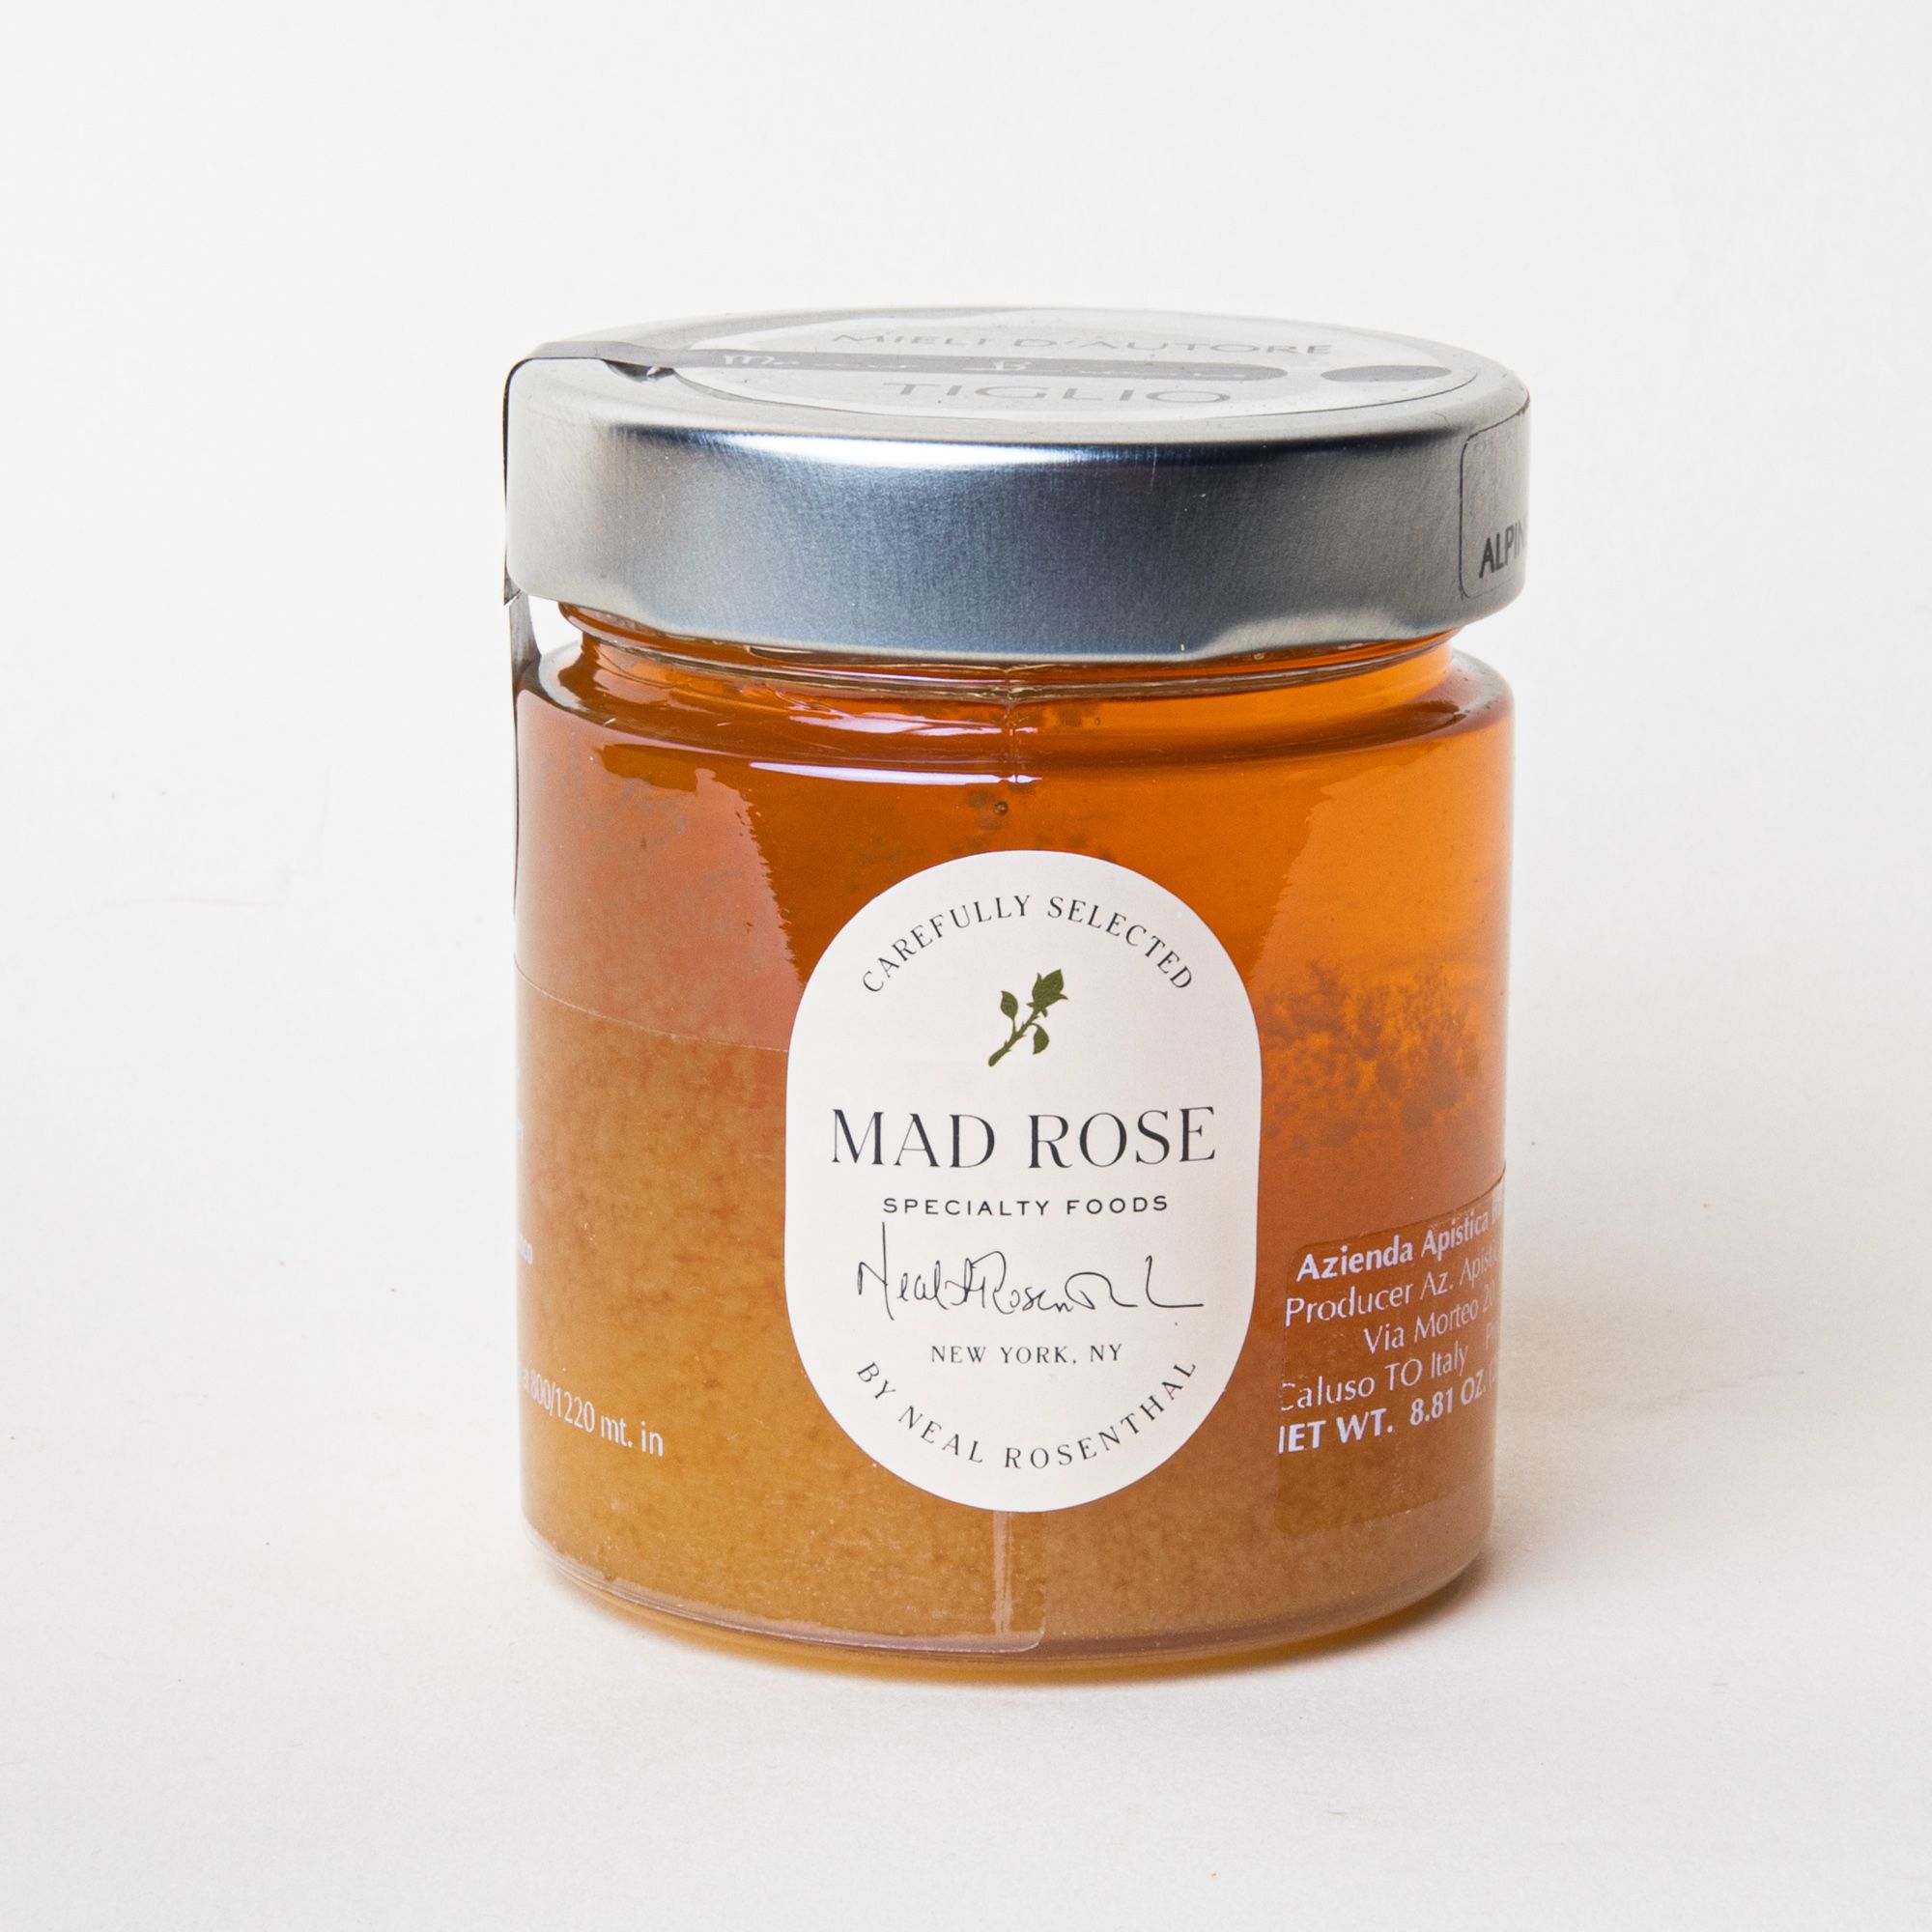 Short clear jar filled with honey and topped with a metal screw cap and small white label